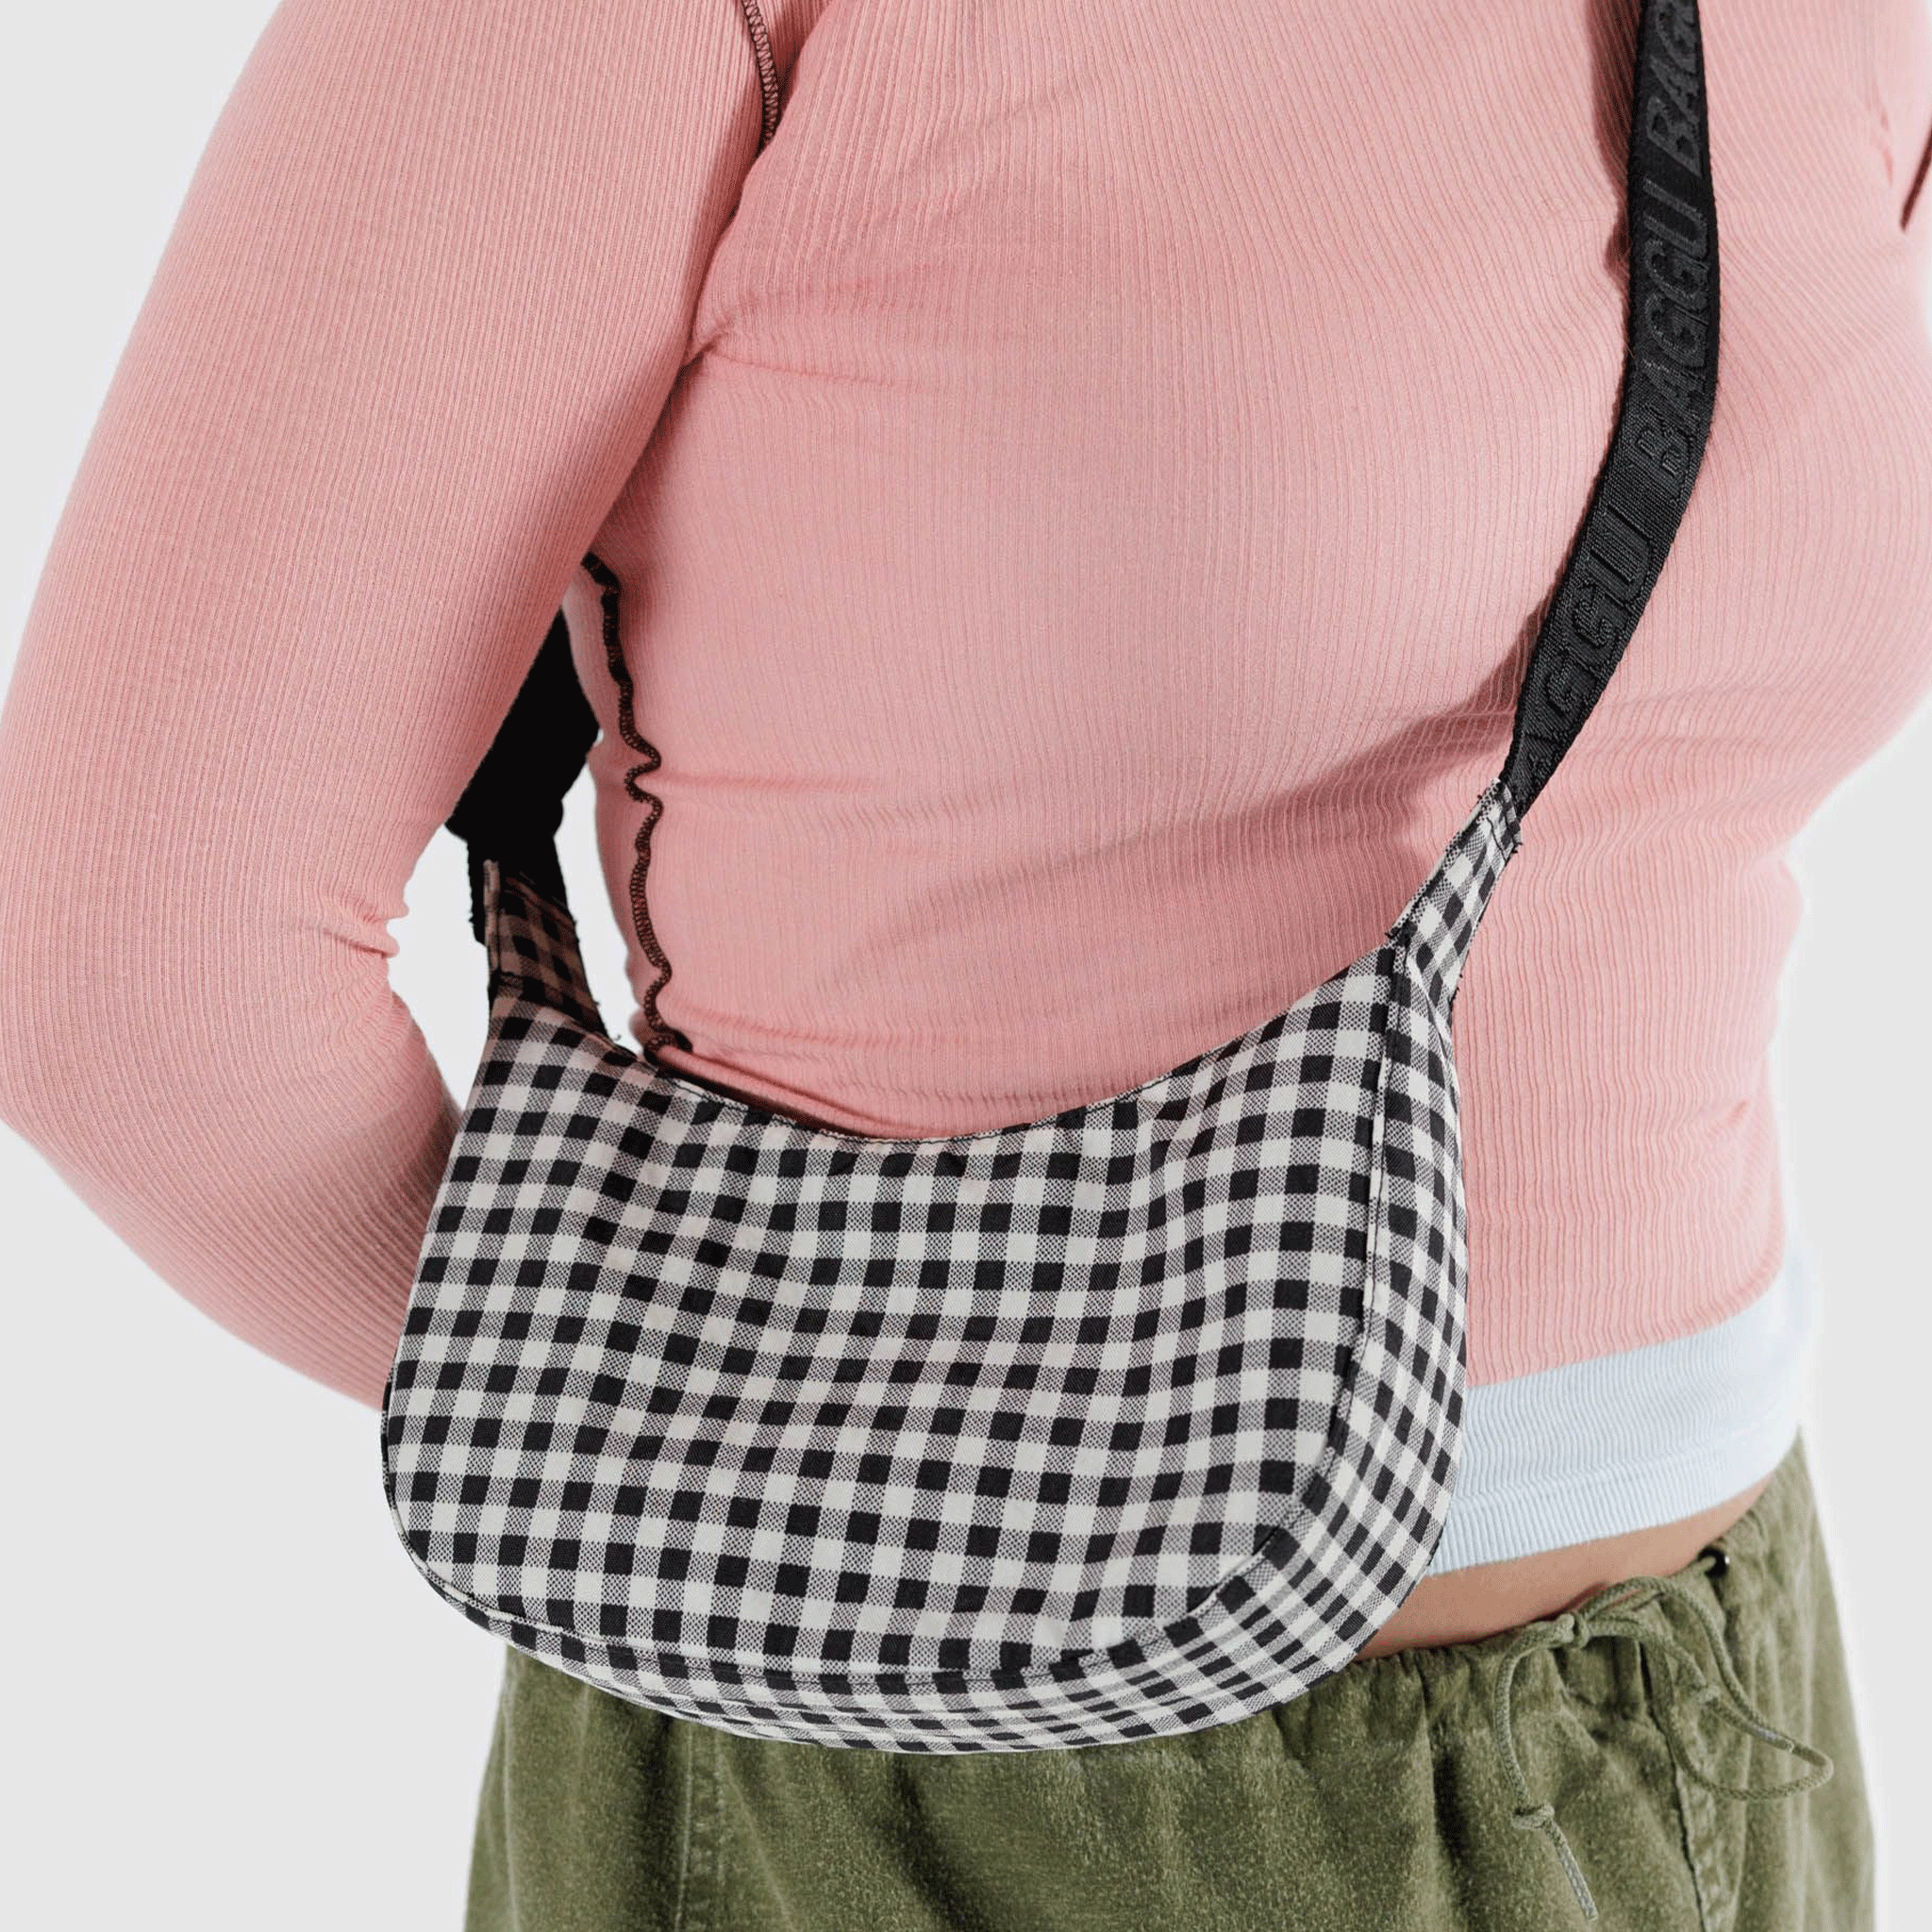 A black and white gingham printed crescent shaped nylon handbag with a black adjustable strap that can go from a shoulder bag to crossbody.